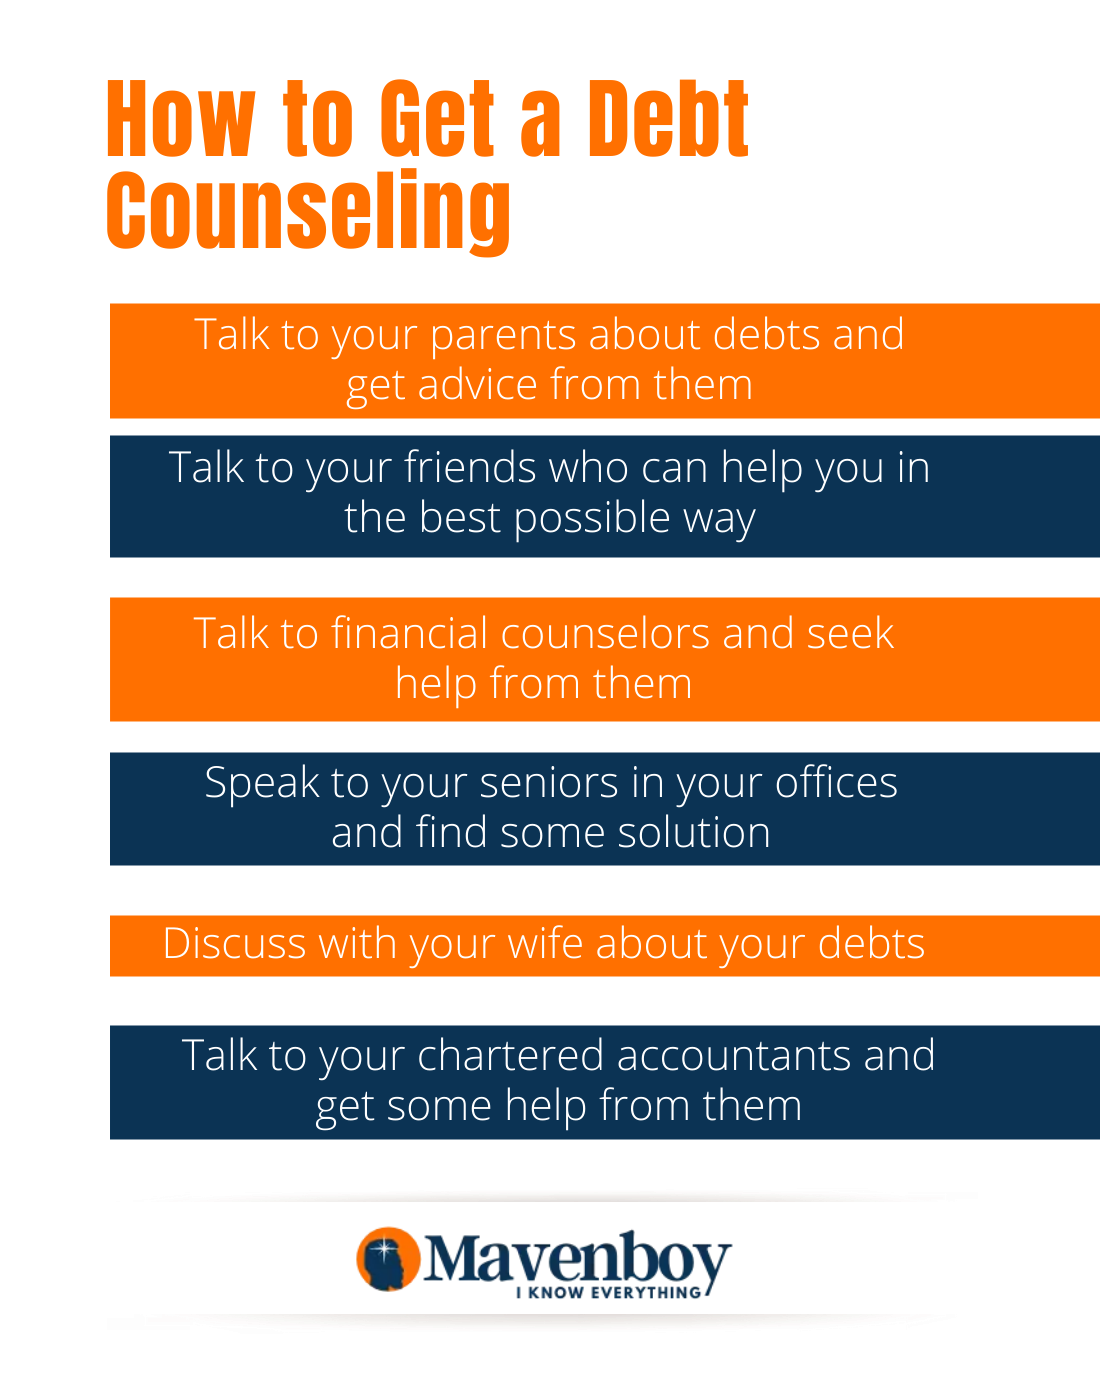 How to get a debt counseling